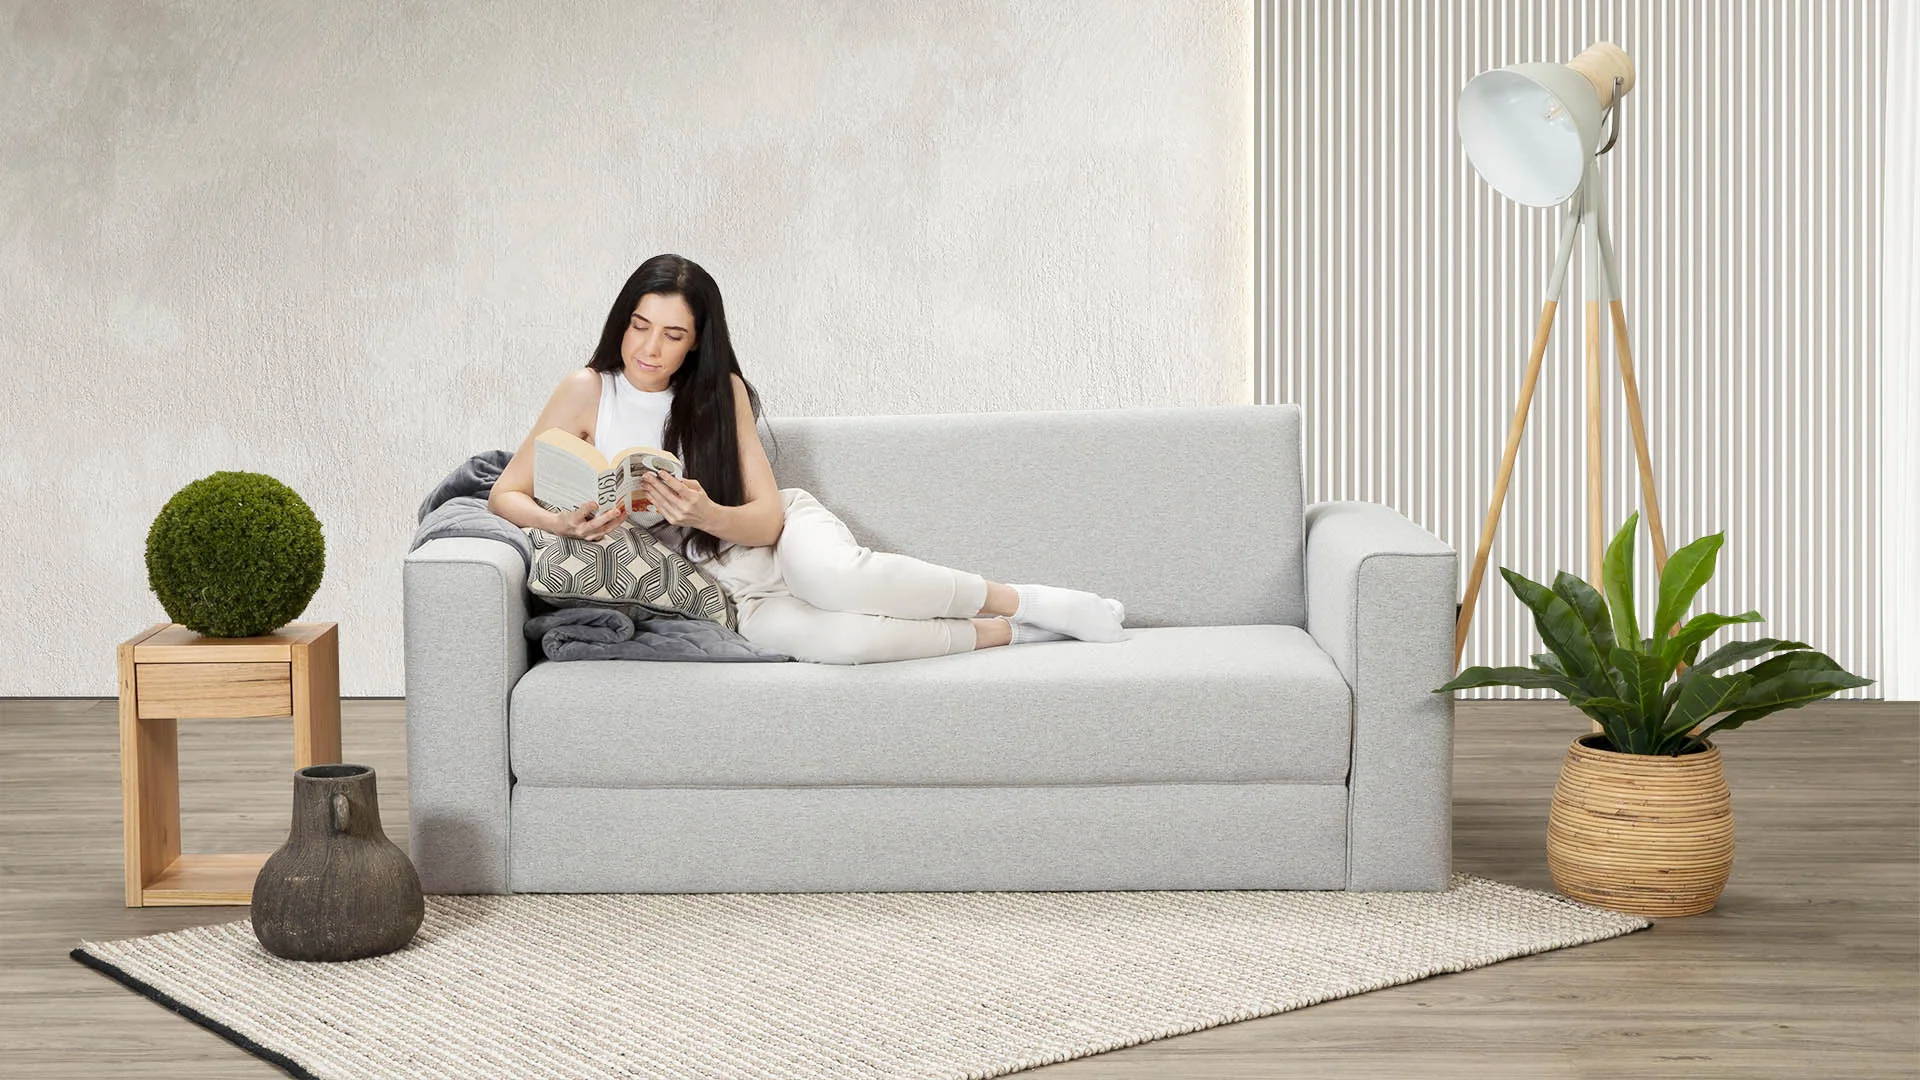 A woman lounging on a new Zeek Silver Sofa Bed reading a book.